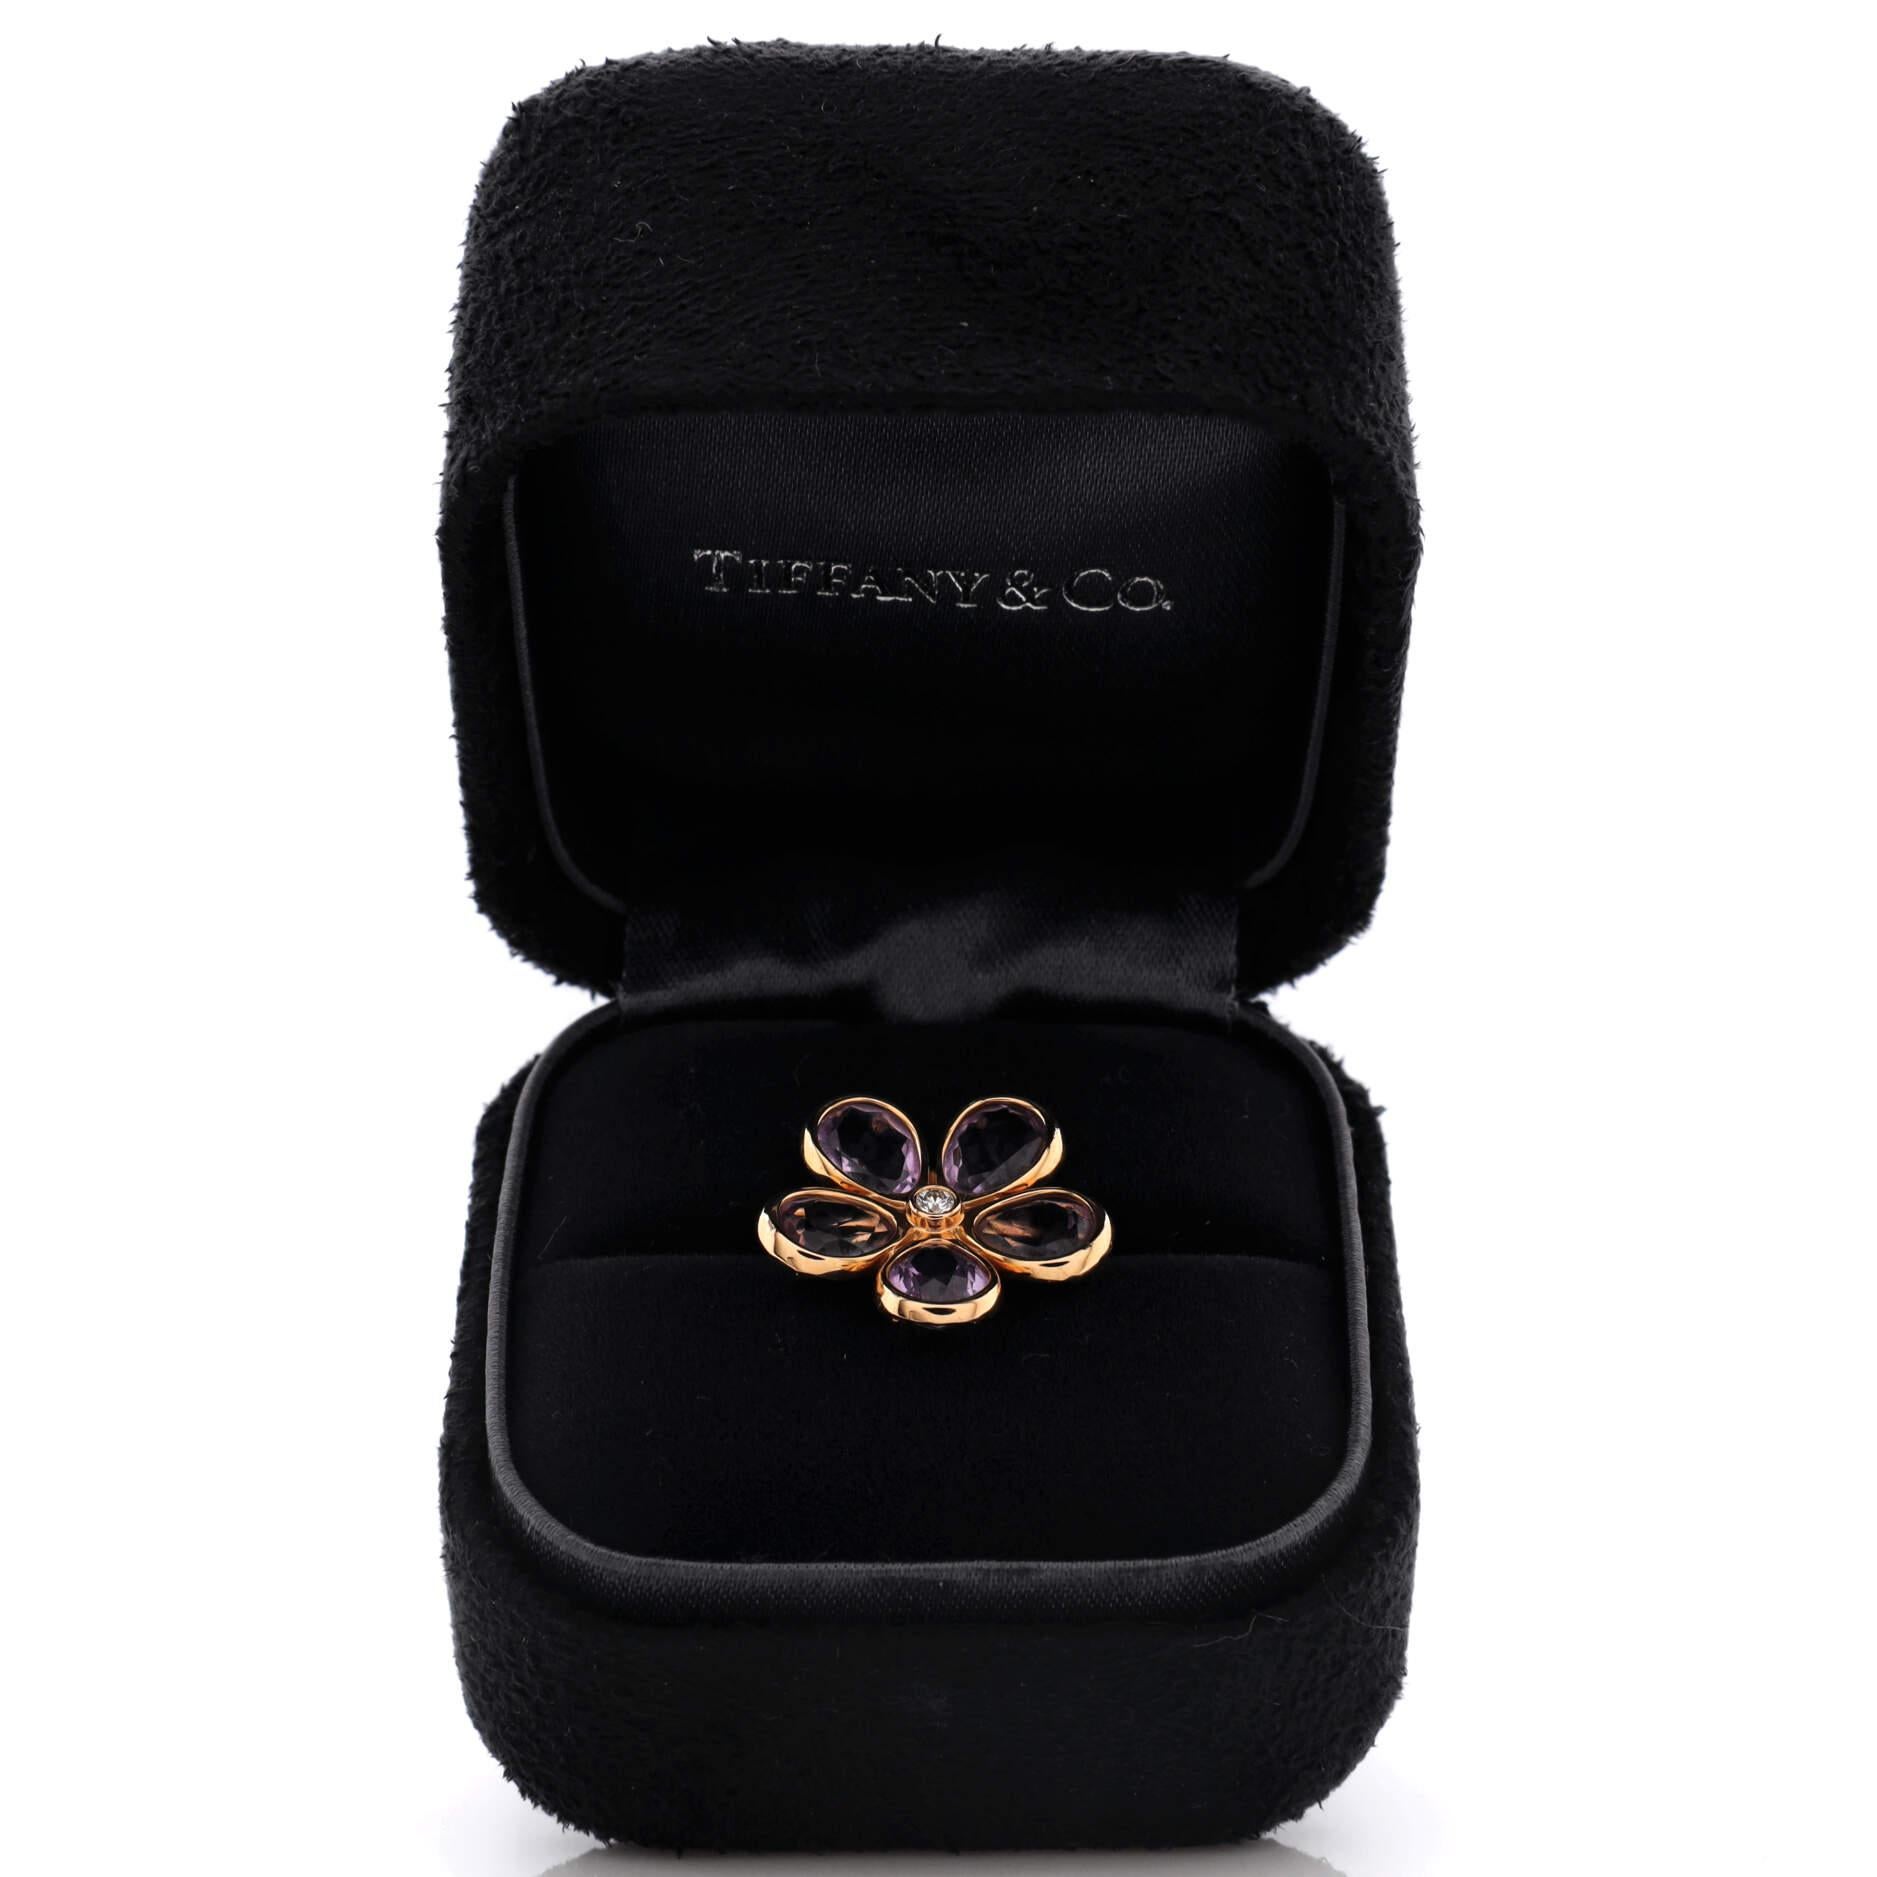 Condition: Very good. Minor wear throughout with loose stones.
Accessories: No Accessories
Measurements: Size: 5, Width: 2.00 mm
Designer: Tiffany & Co.
Model: Sparklers Flower Ring 18K Rose Gold with Amethyst and Diamond
Exterior Color: Rose